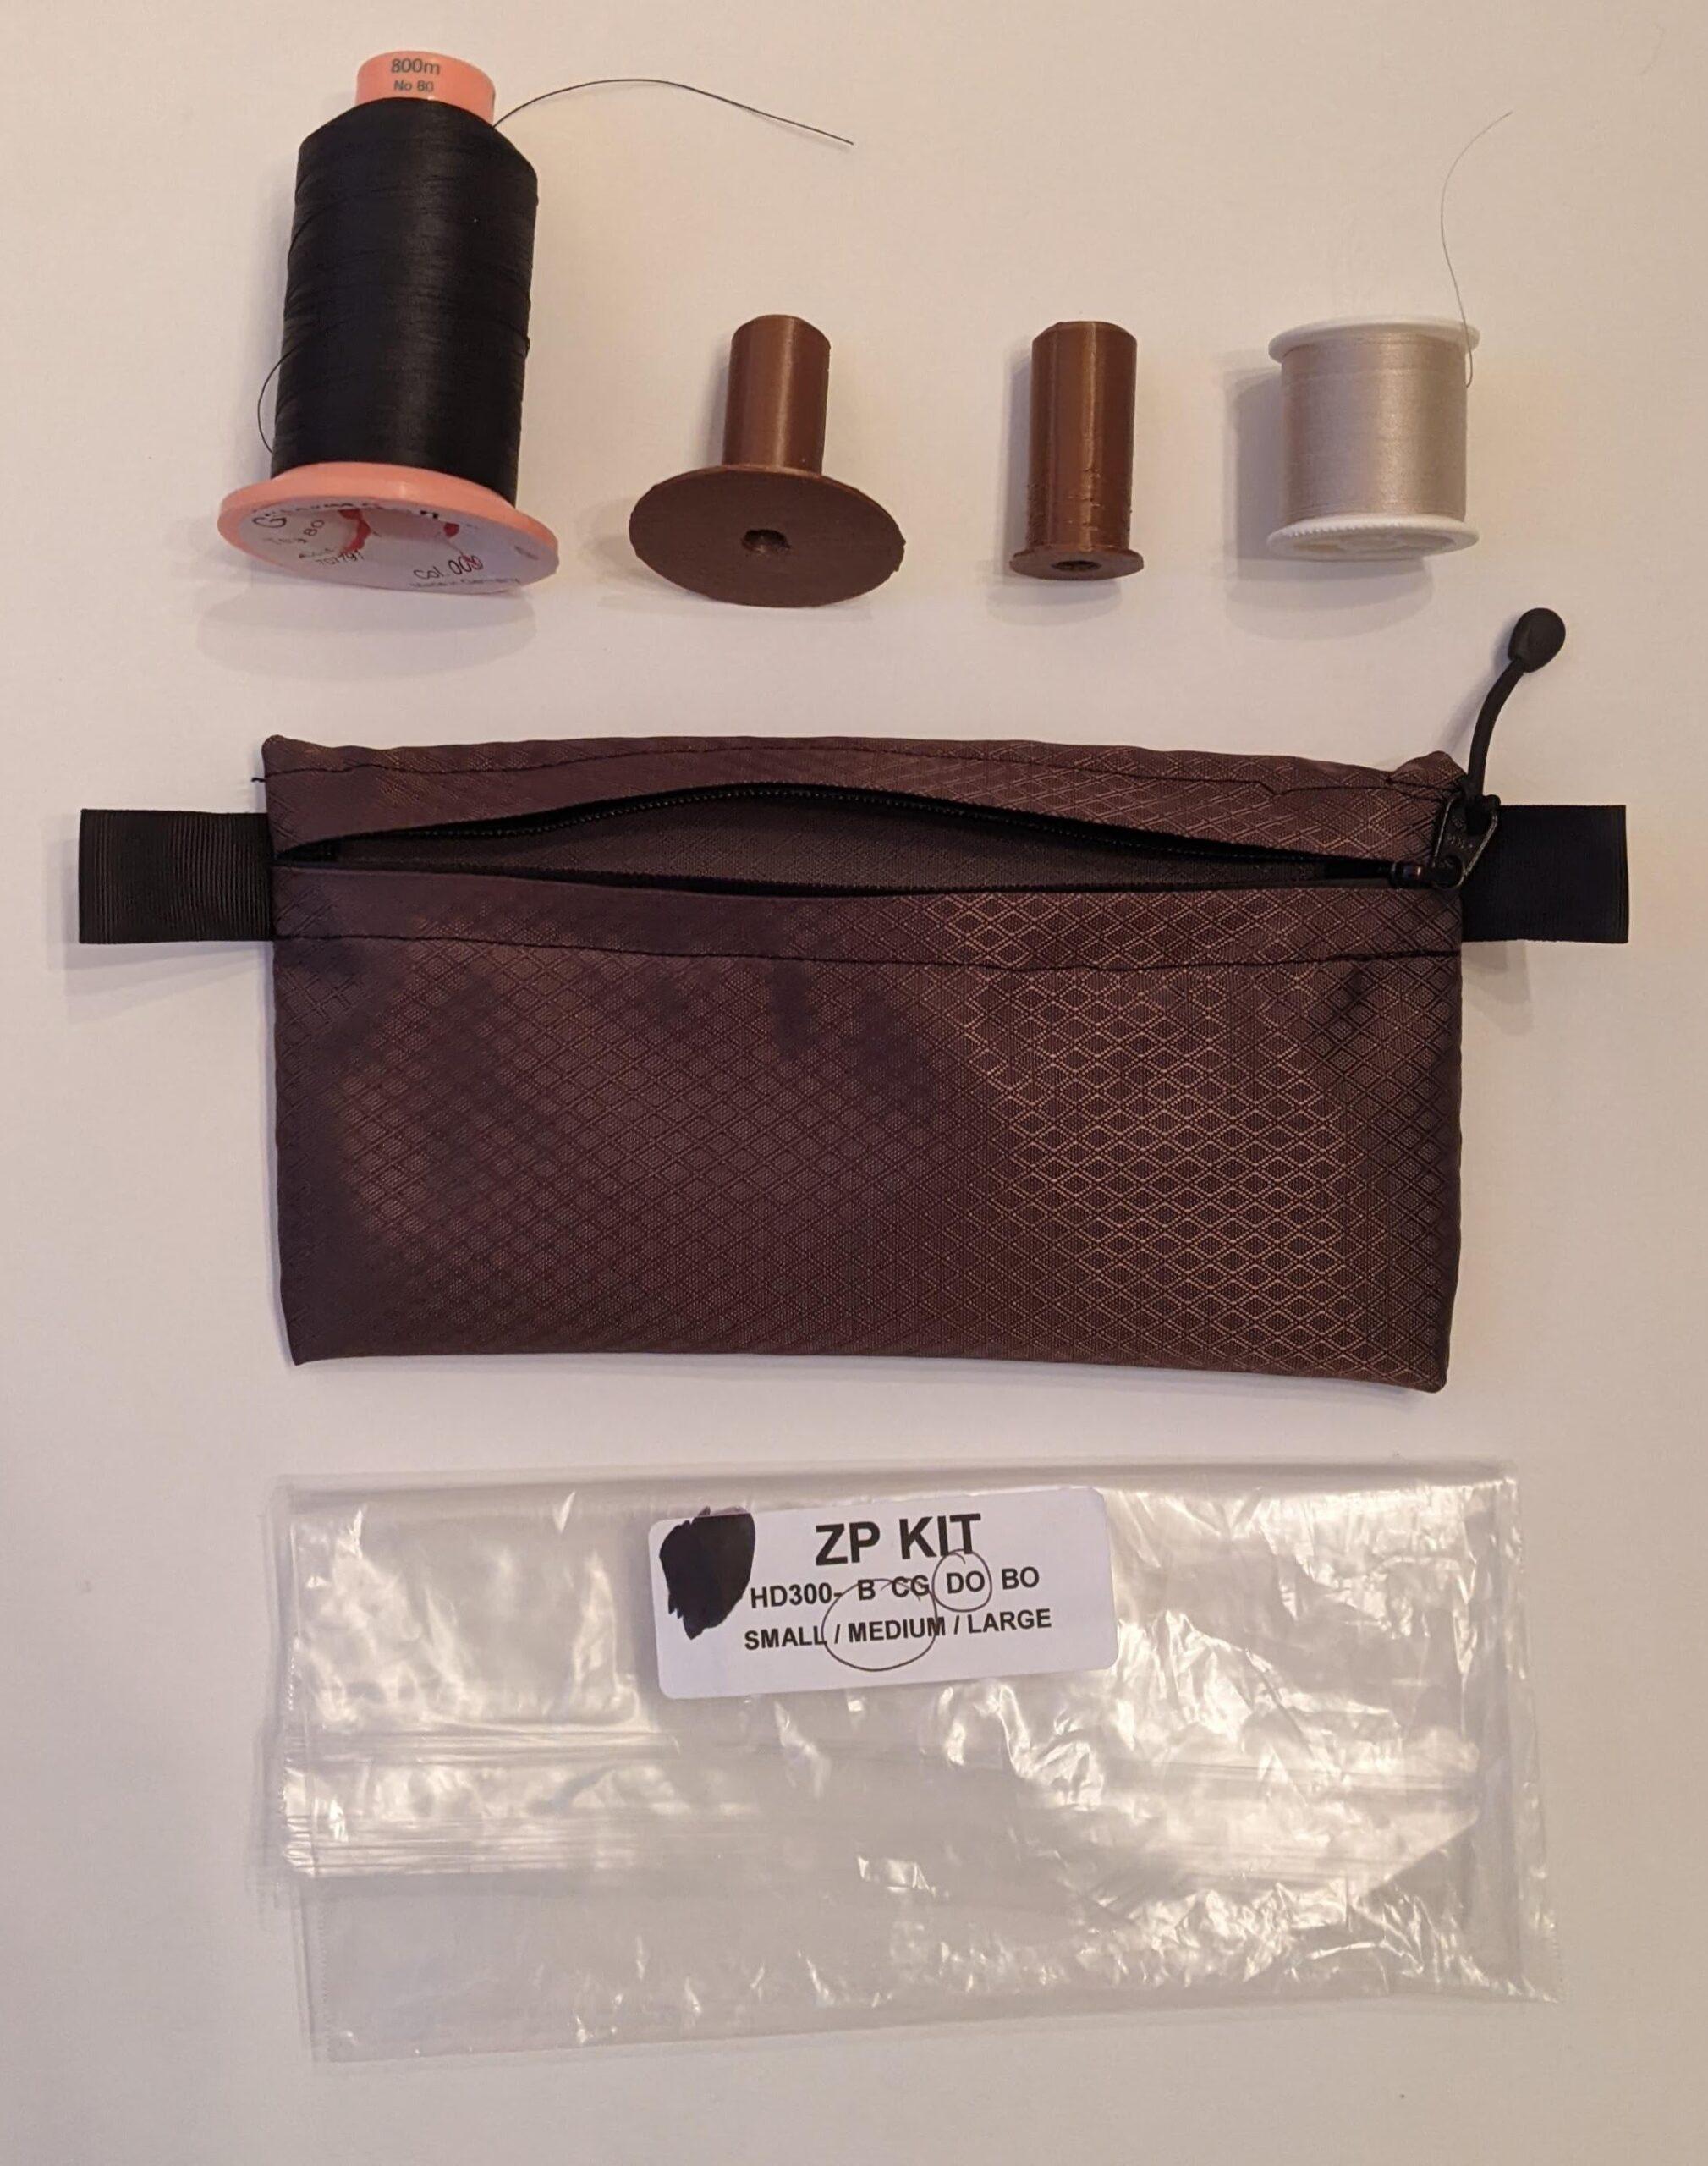 RBTR zippered pouch, and spool adapters pictured